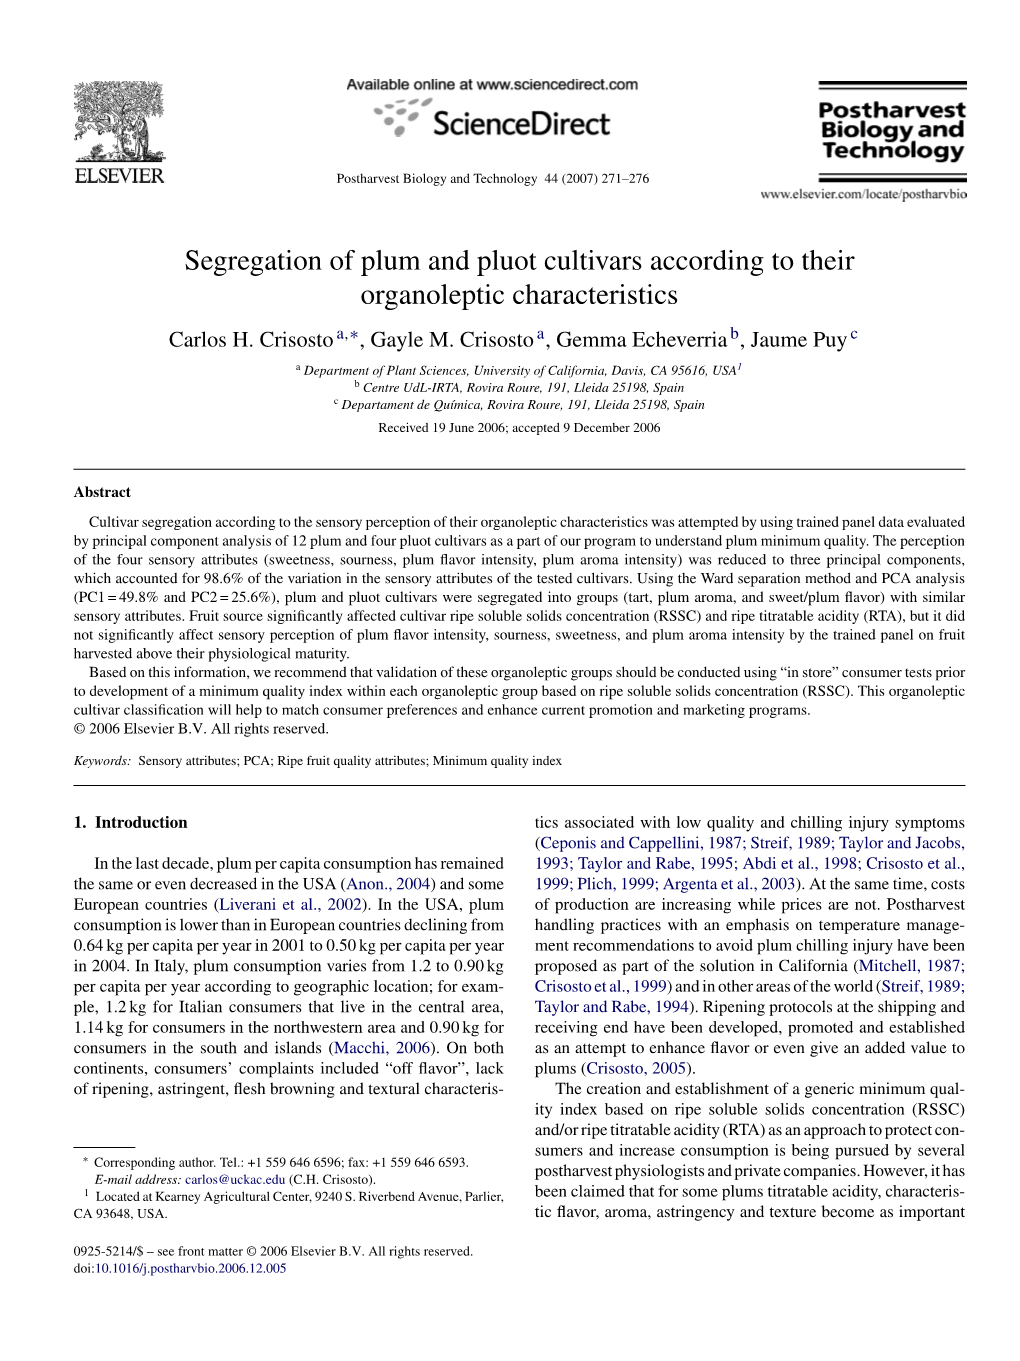 Segregation of Plum and Pluot Cultivars According to Their Organoleptic Characteristics Carlos H